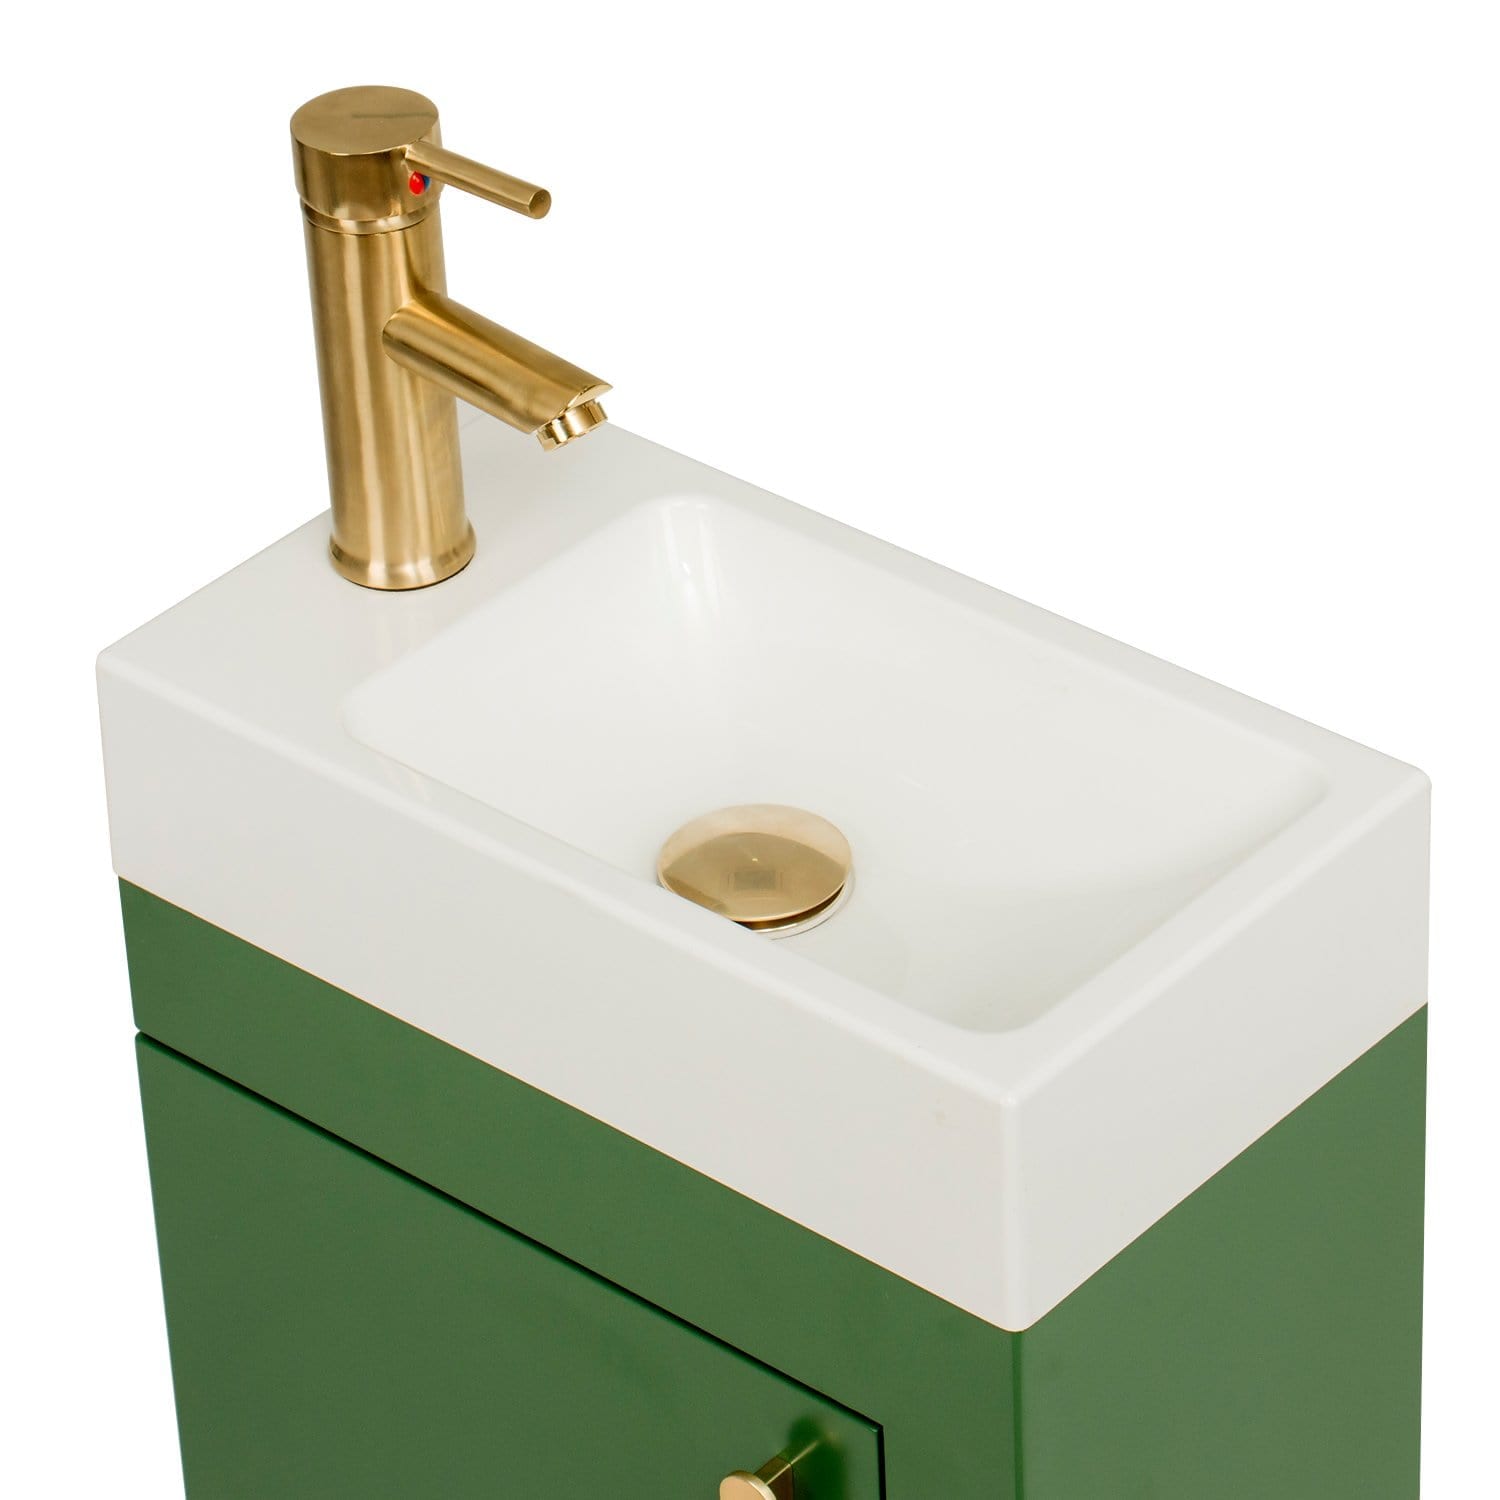 Above view of of Elecwish Modern Green Lavatory Wall-Mounted Vanity Set BV1002